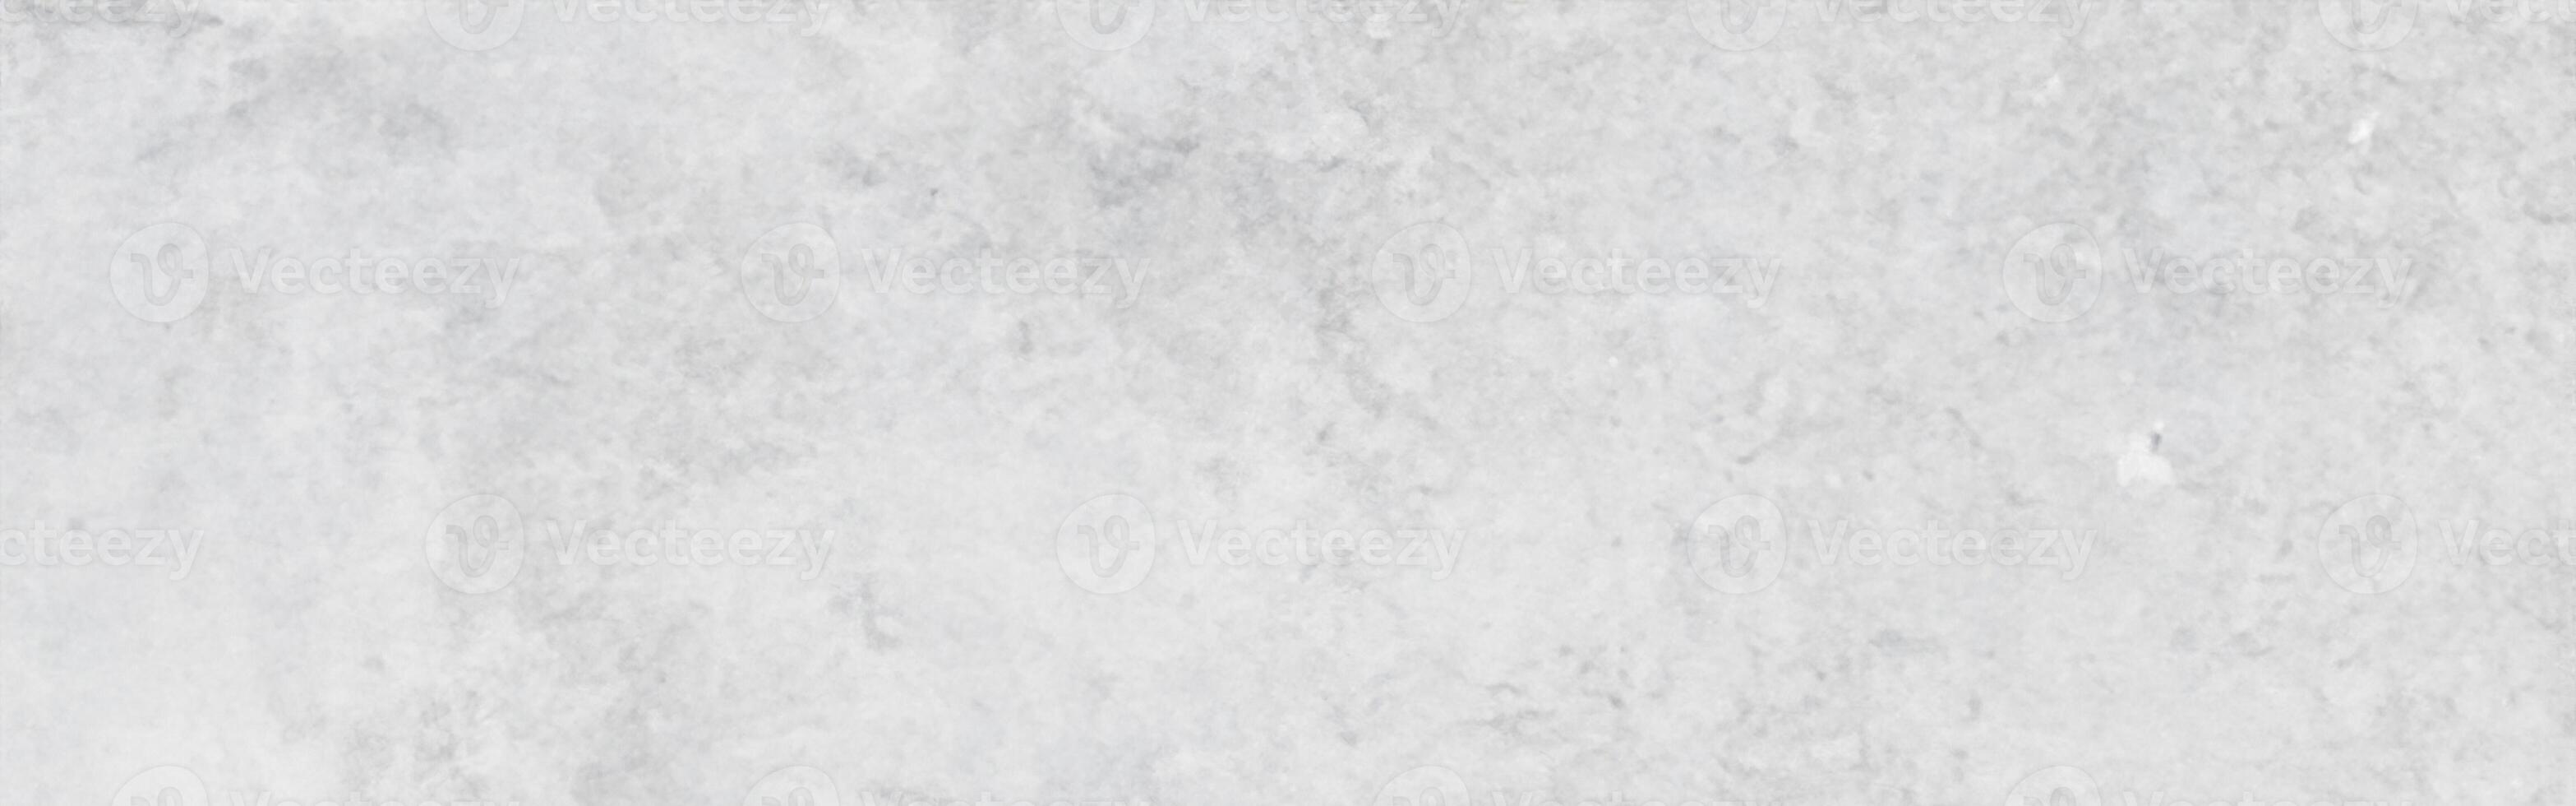 White watercolor background painting with cloudy distressed texture and marbled grunge, white background paper texture and vintage grunge, soft gray or silver vintage colors. photo